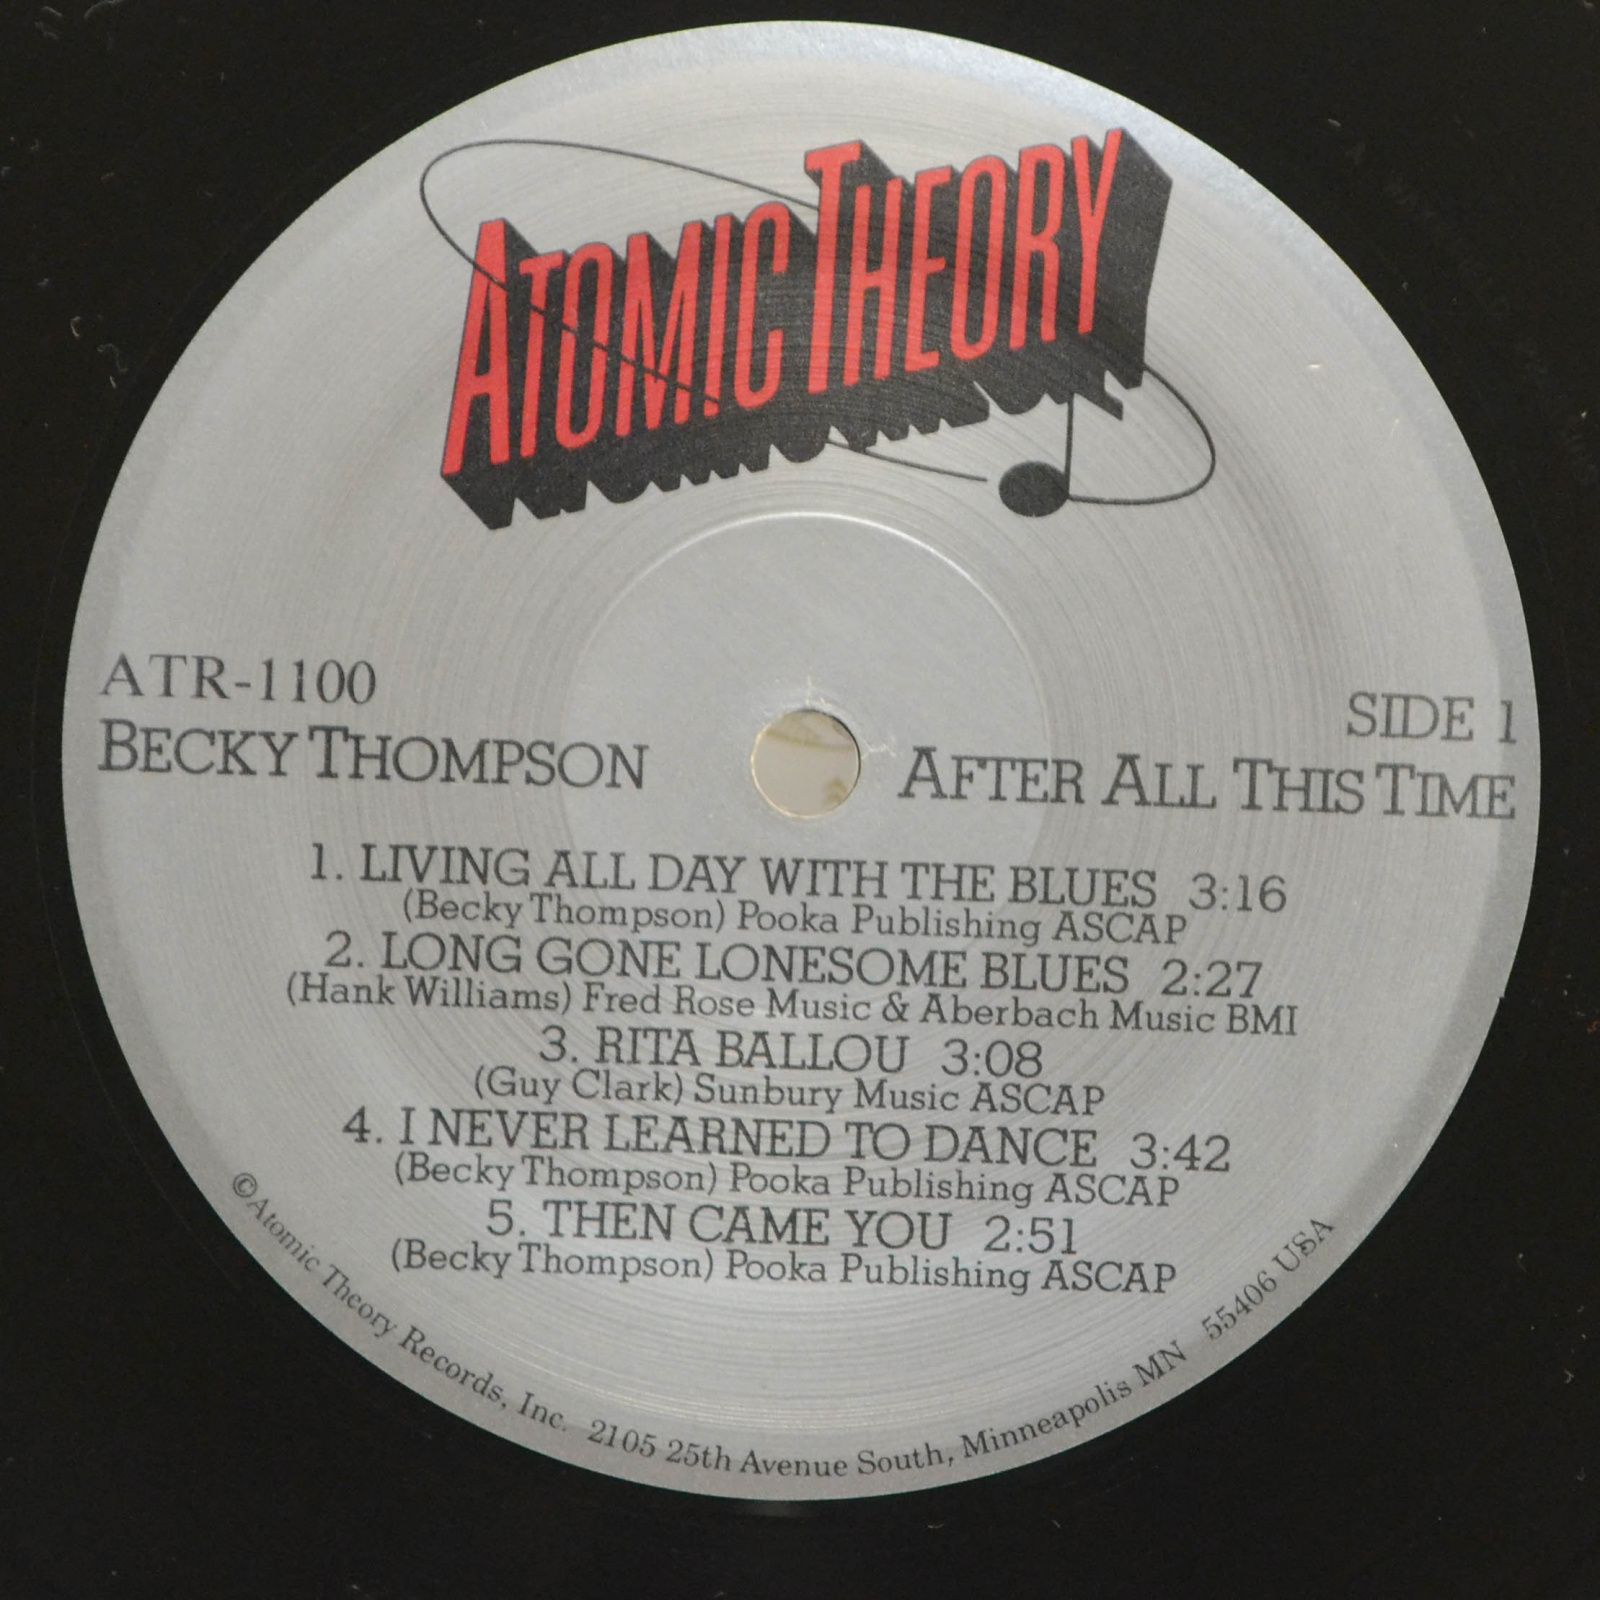 Becky Thompson — After All This Time, 1988